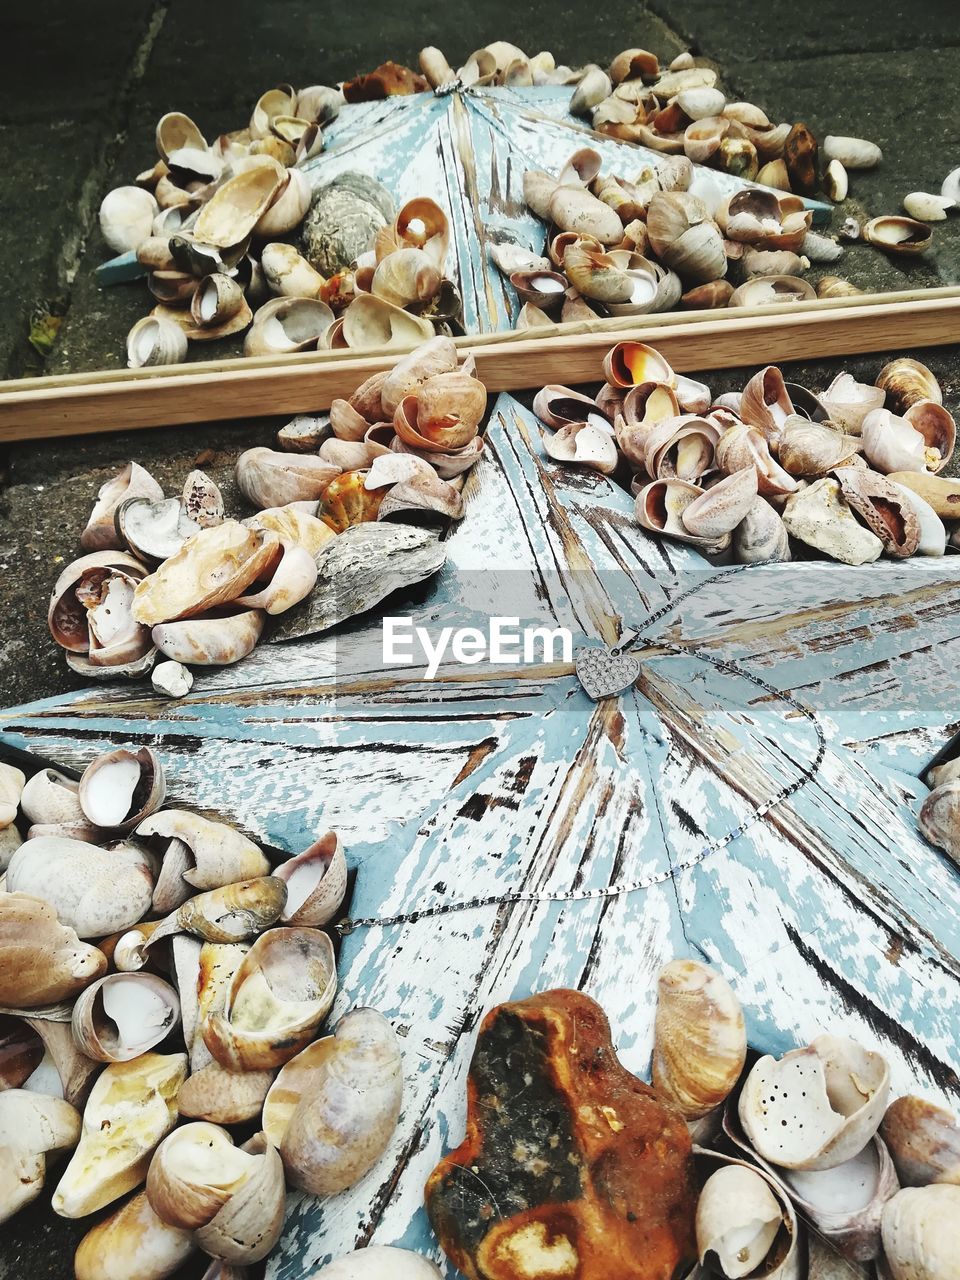 HIGH ANGLE VIEW OF FISHES IN MARKET